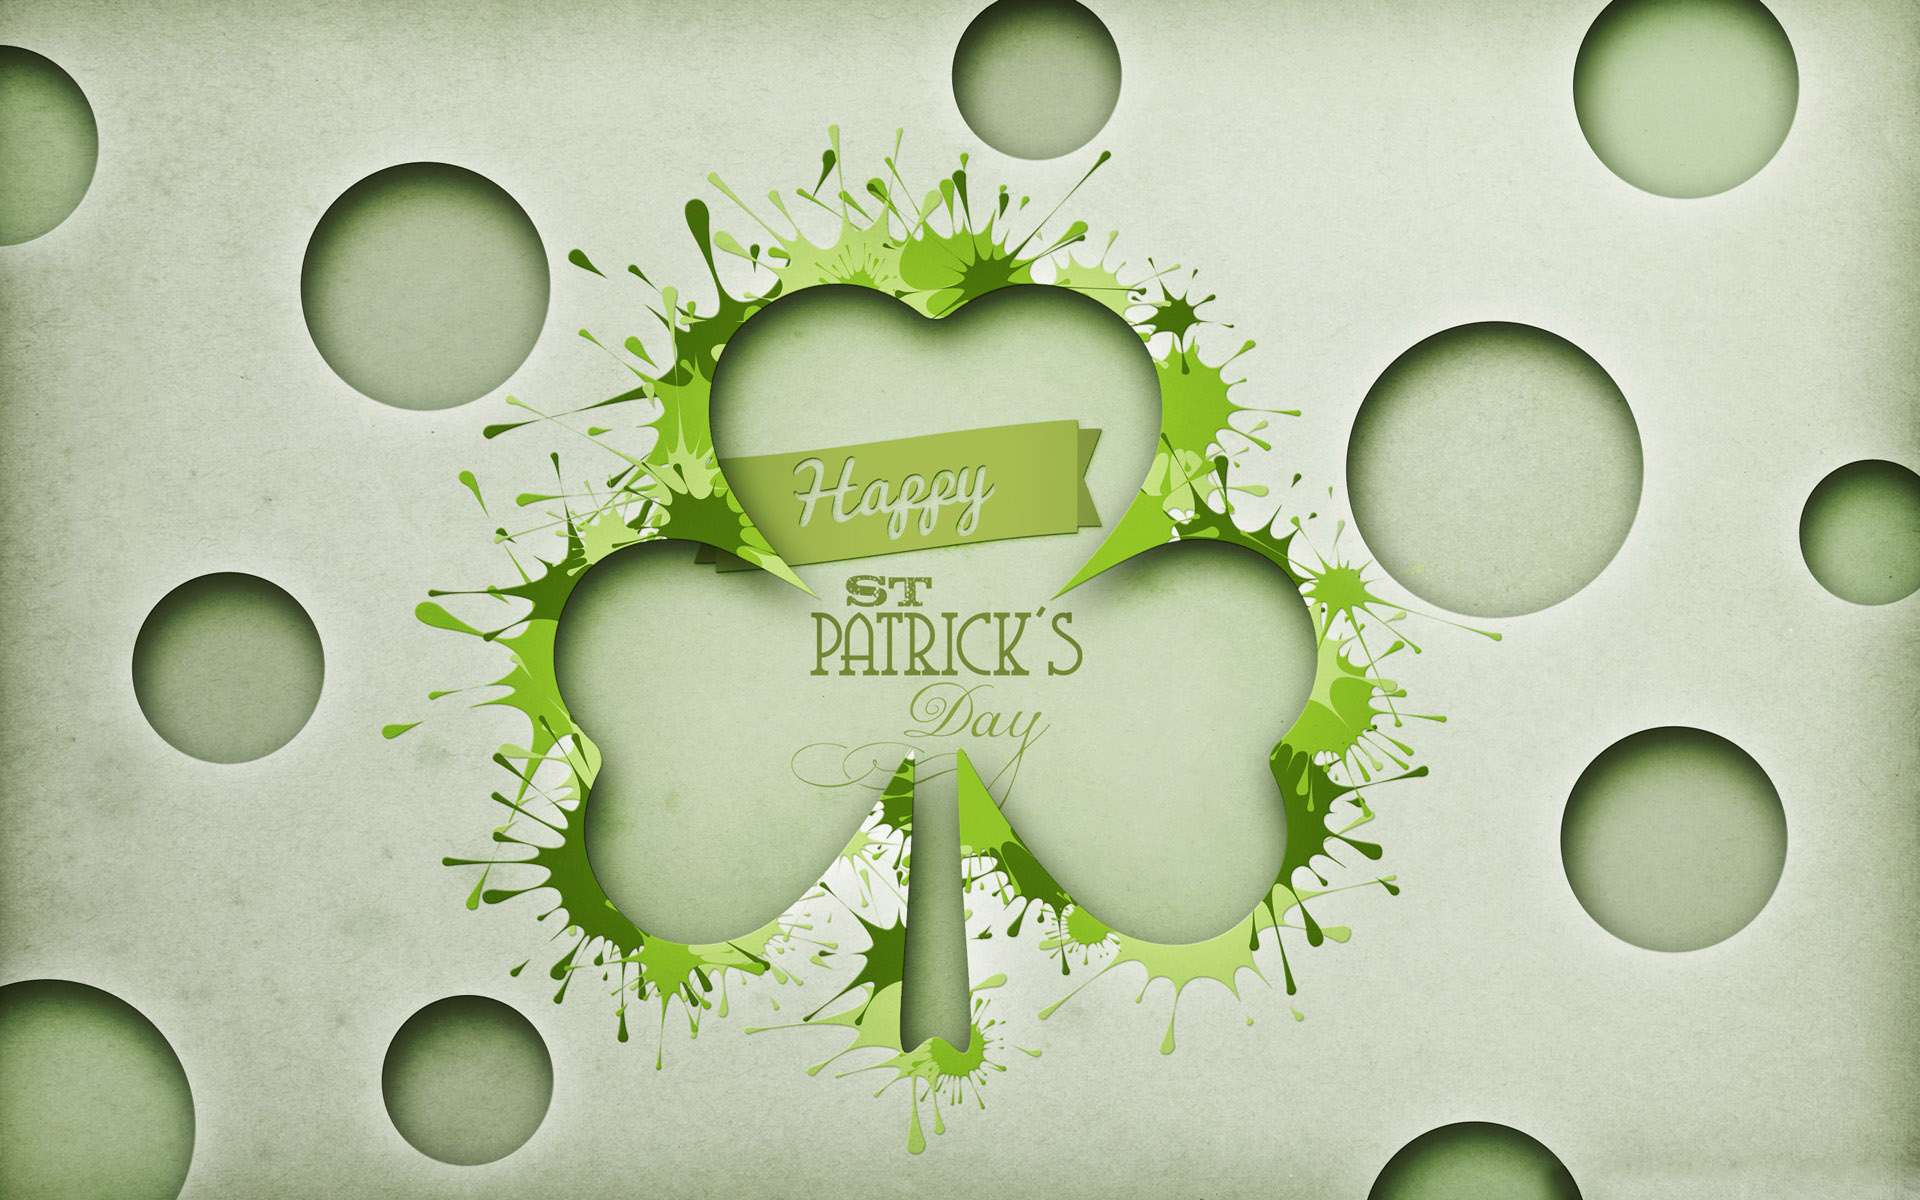 Holiday St. Patrick's Day HD Wallpaper Background Image.